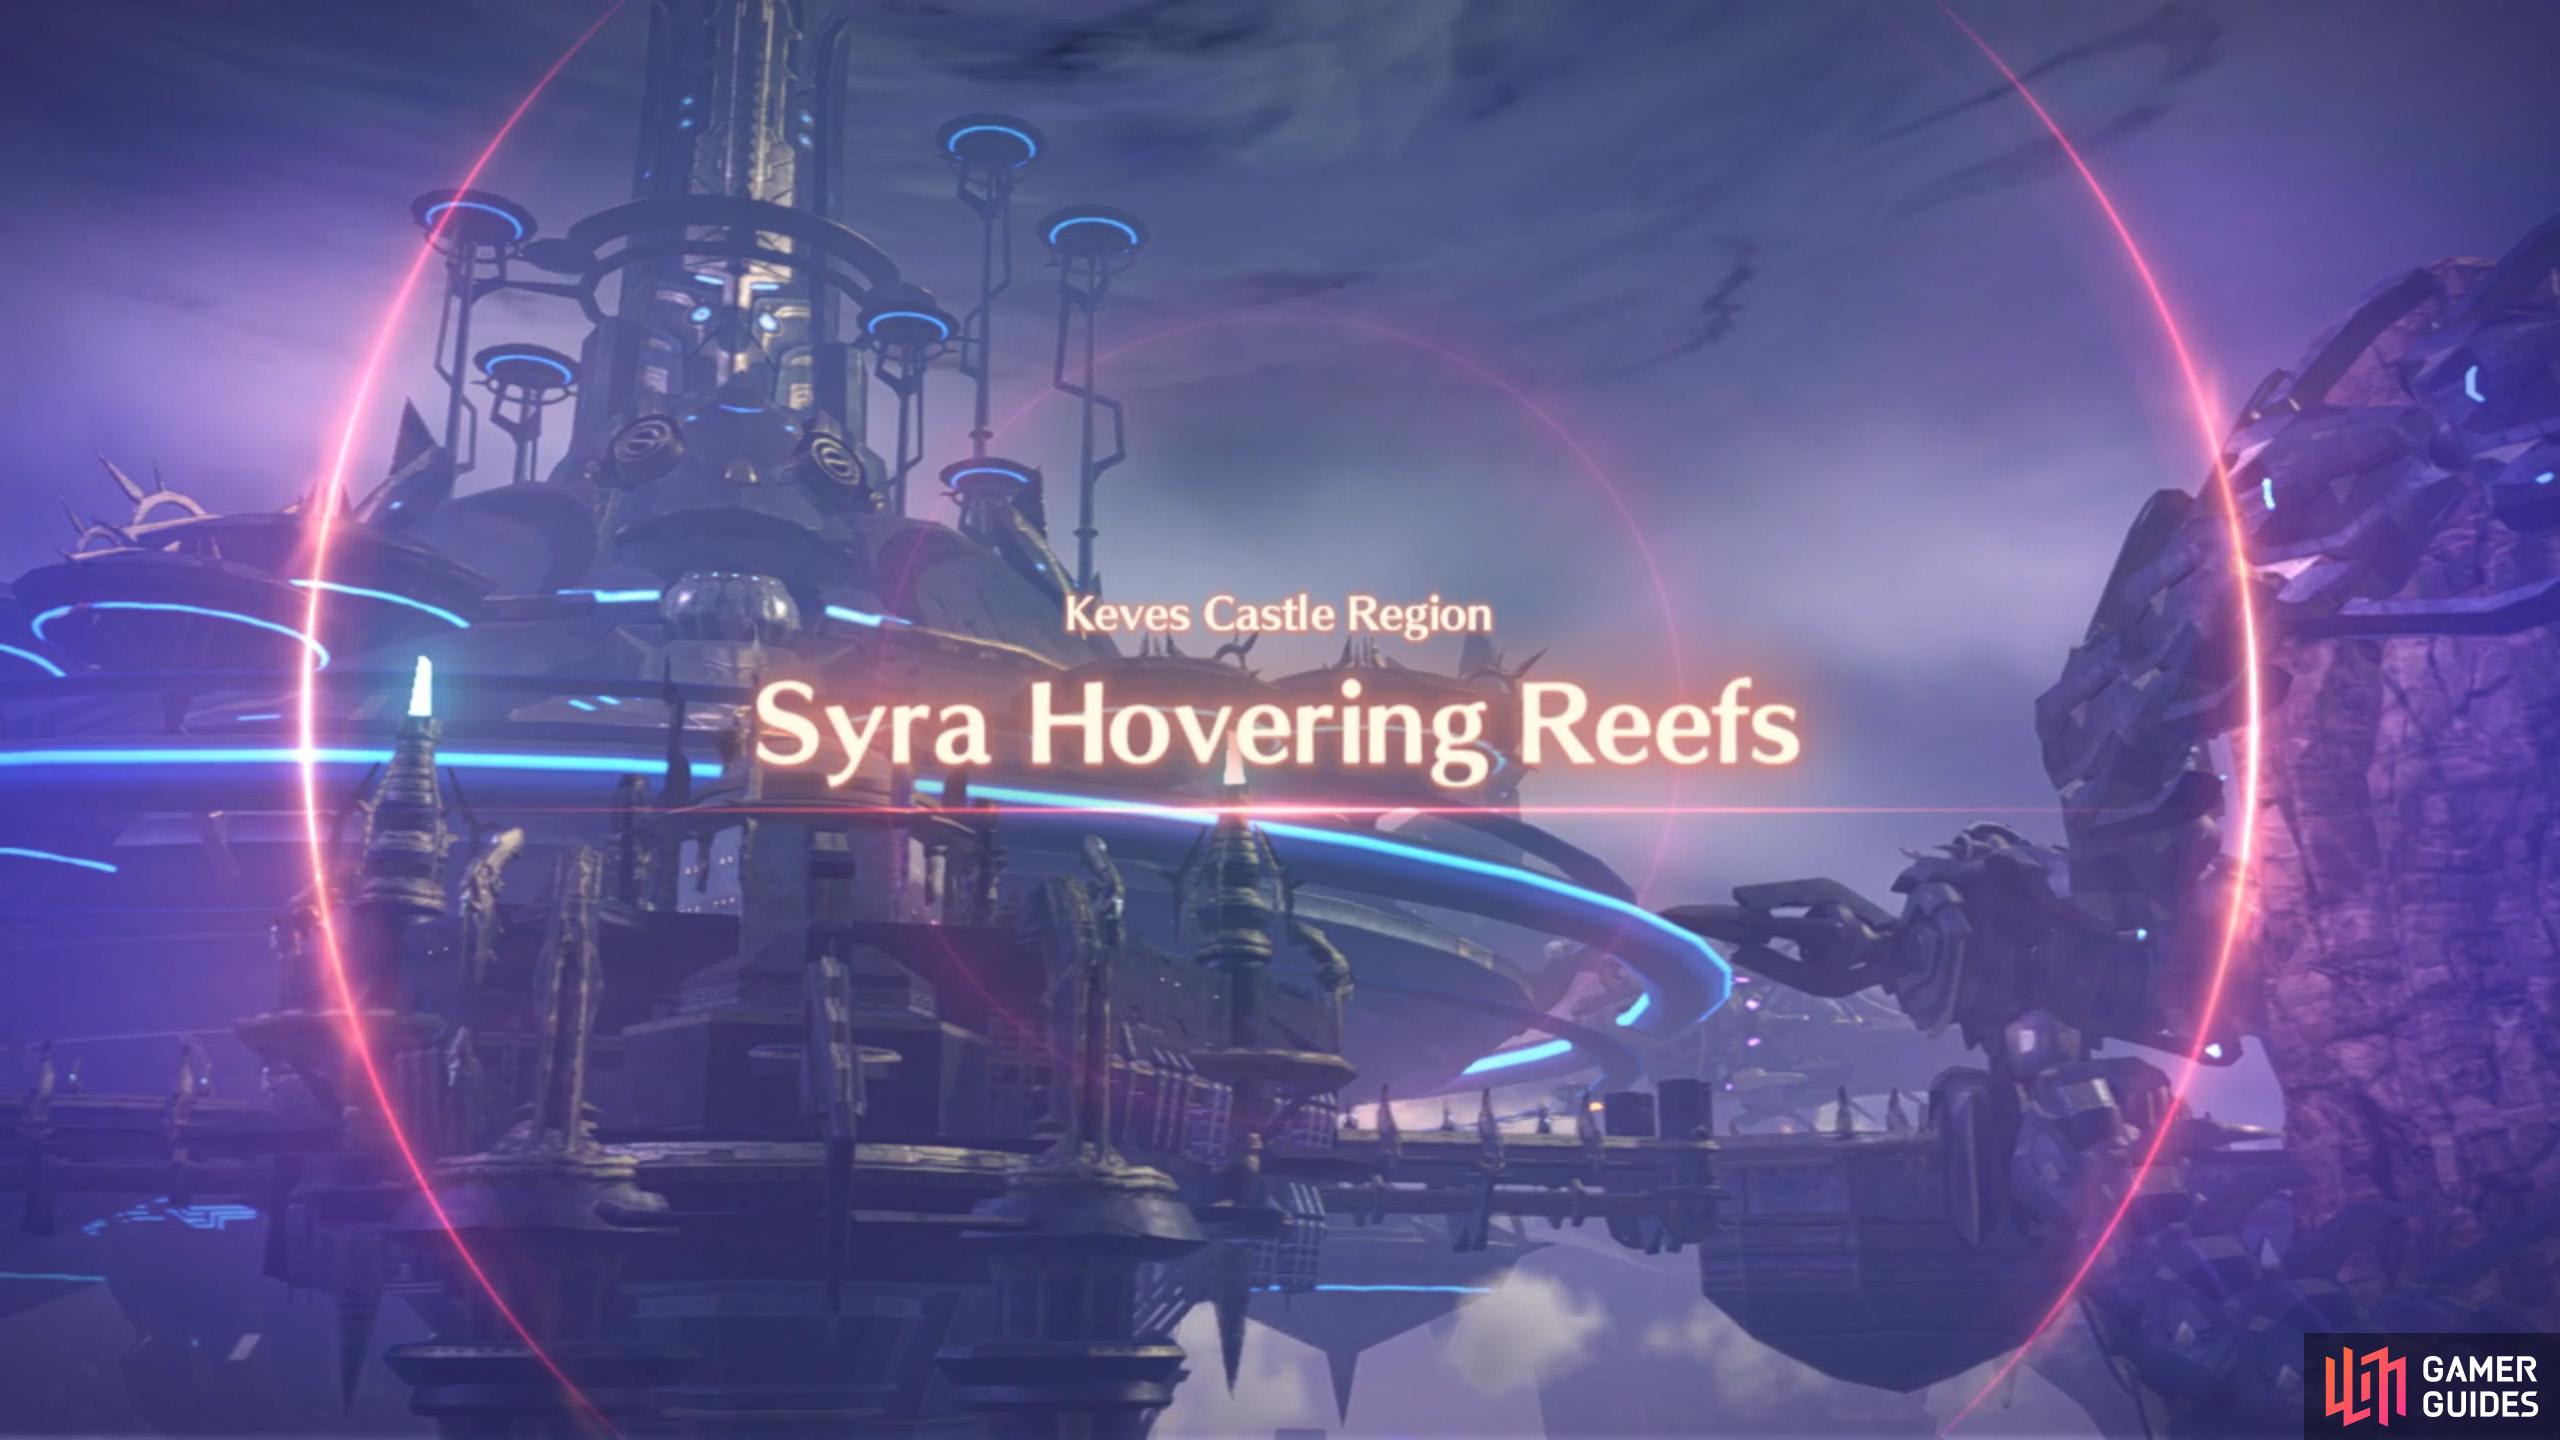 Syra Hovering Reefs is just outside Keves Castle.